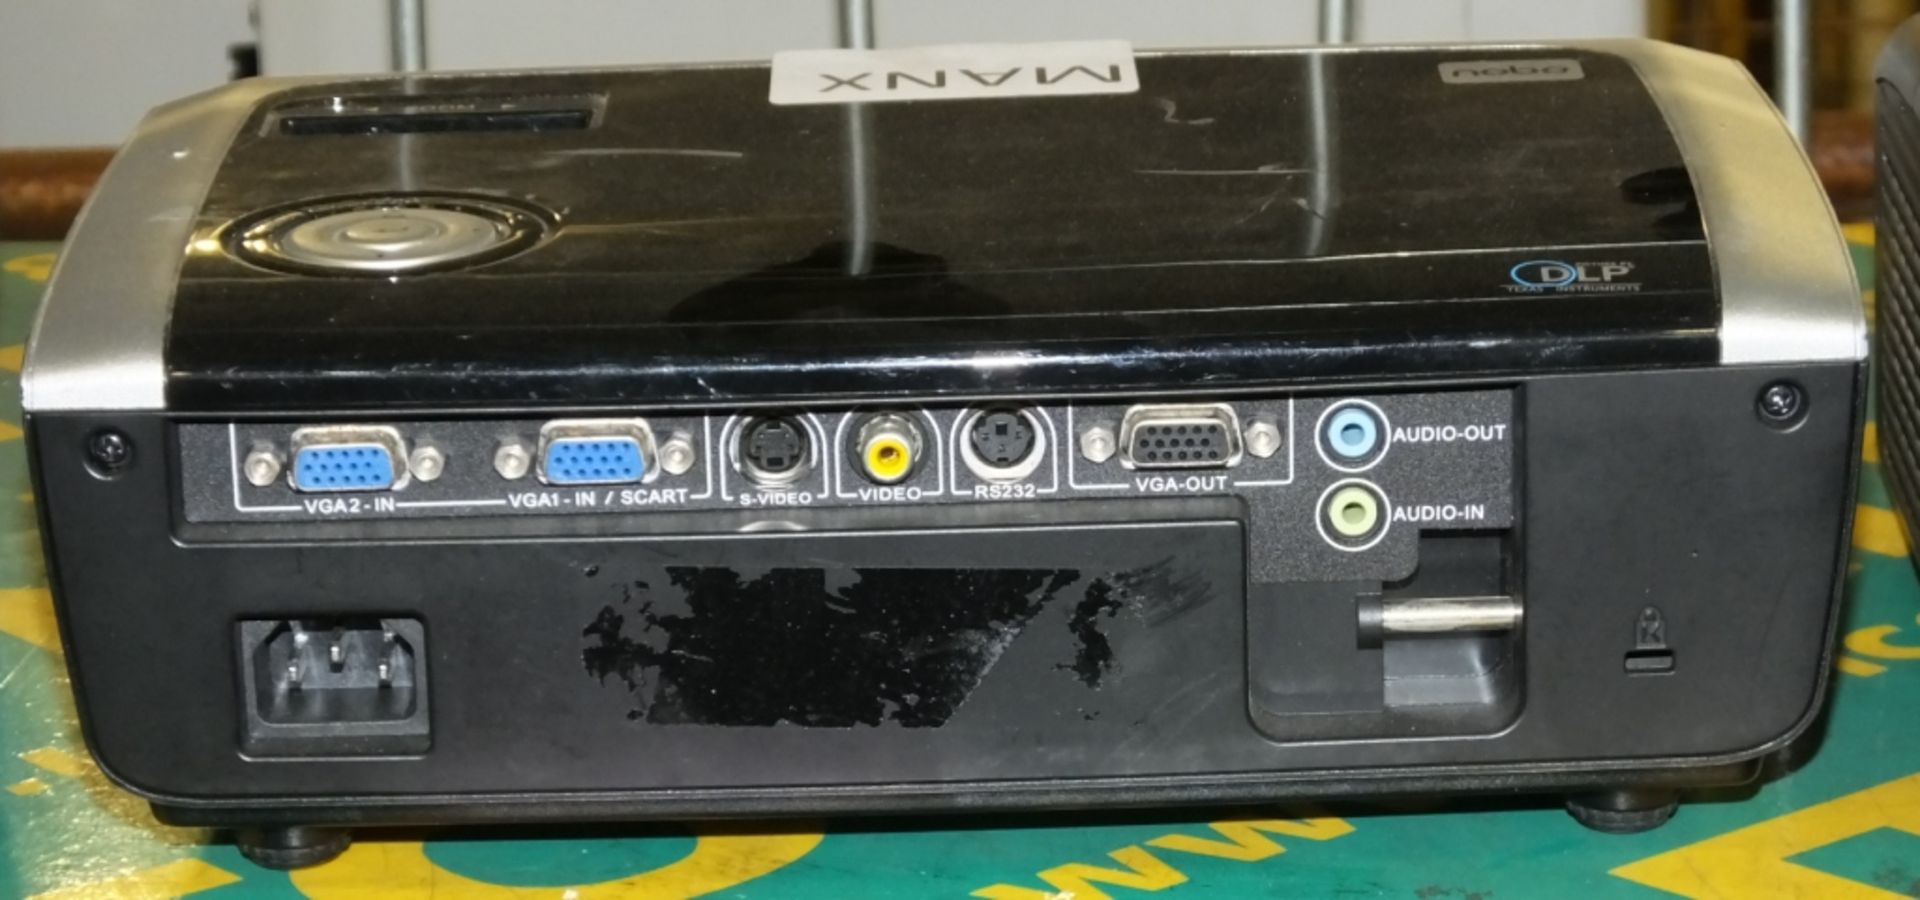 NOBO X28 DLP Projector - Image 2 of 2